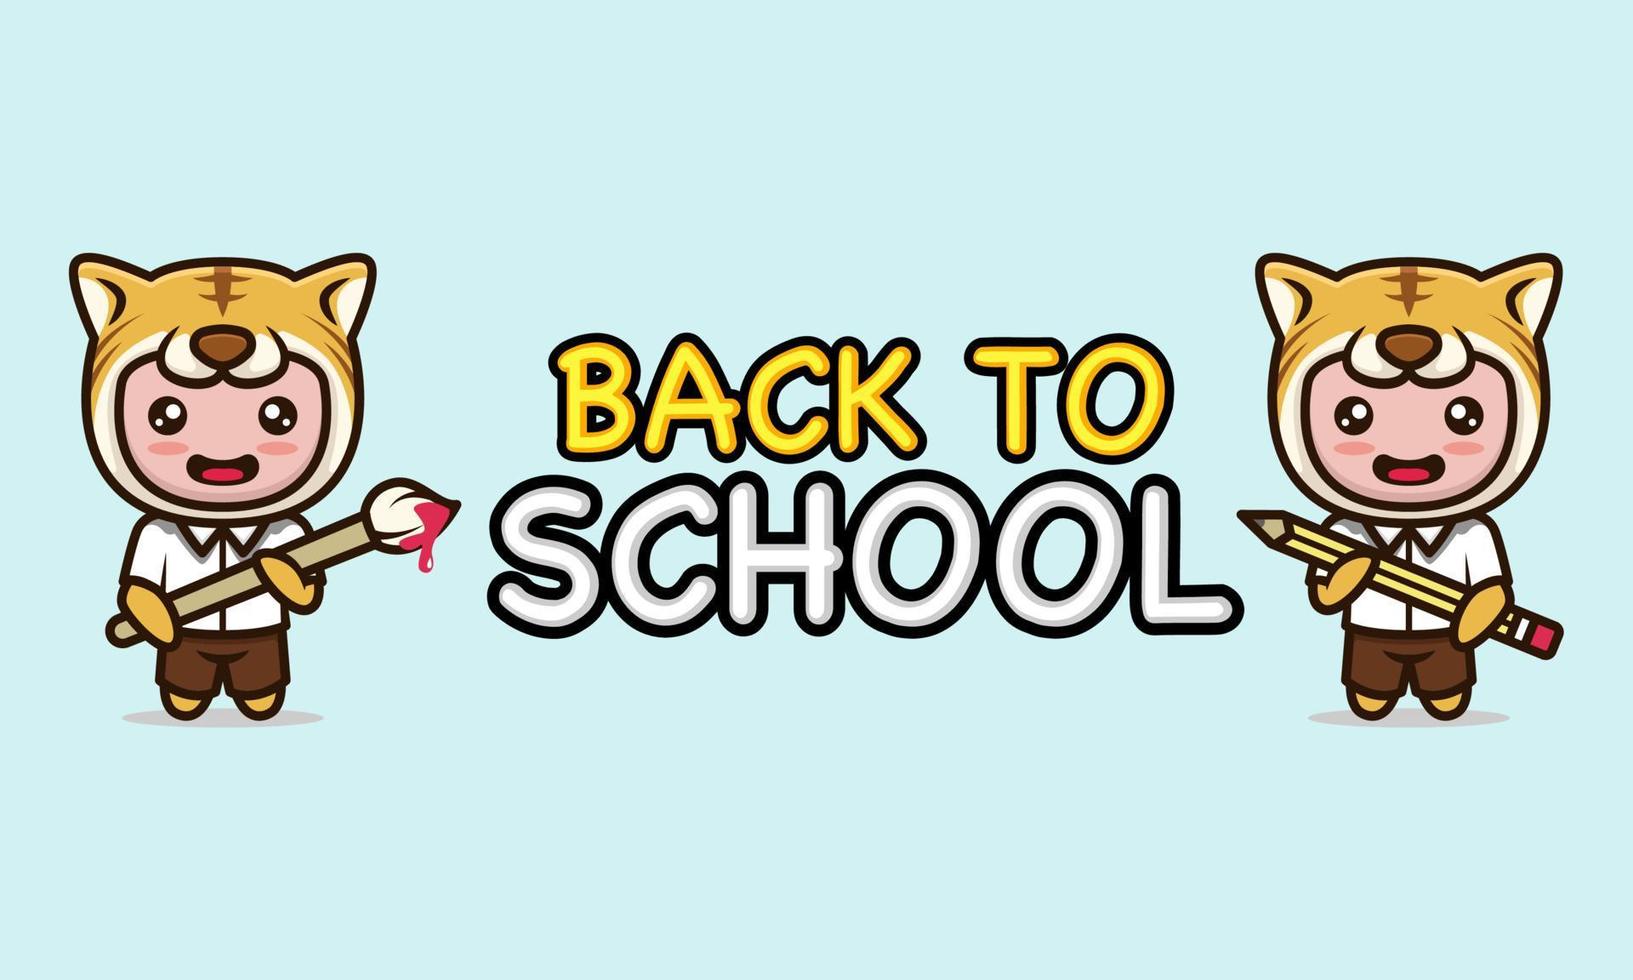 Cute kid with tiger costume in back to school banner design vector